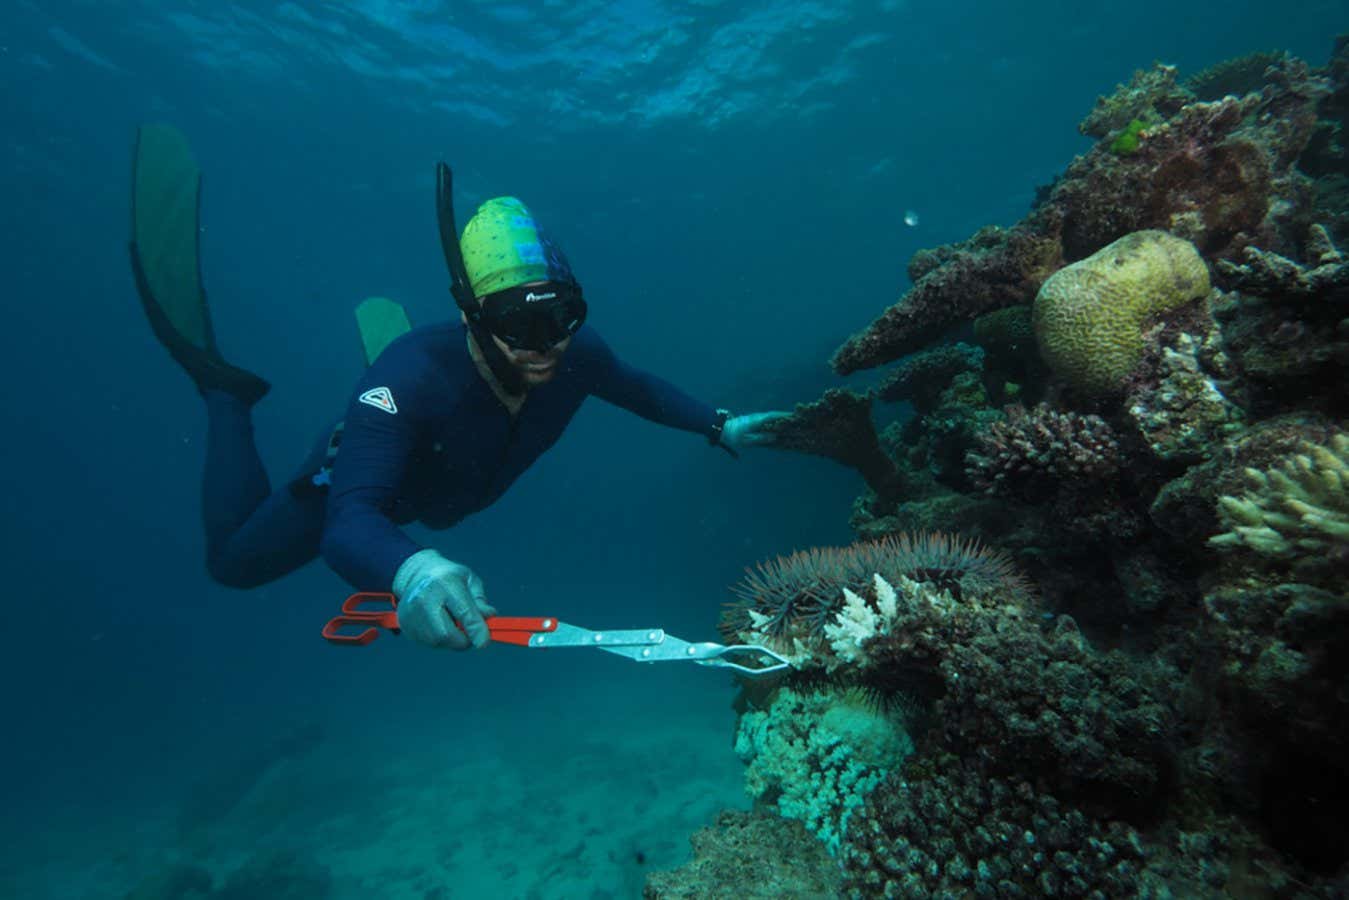 Culling predatory starfish conserves coral on the Great Barrier Reef